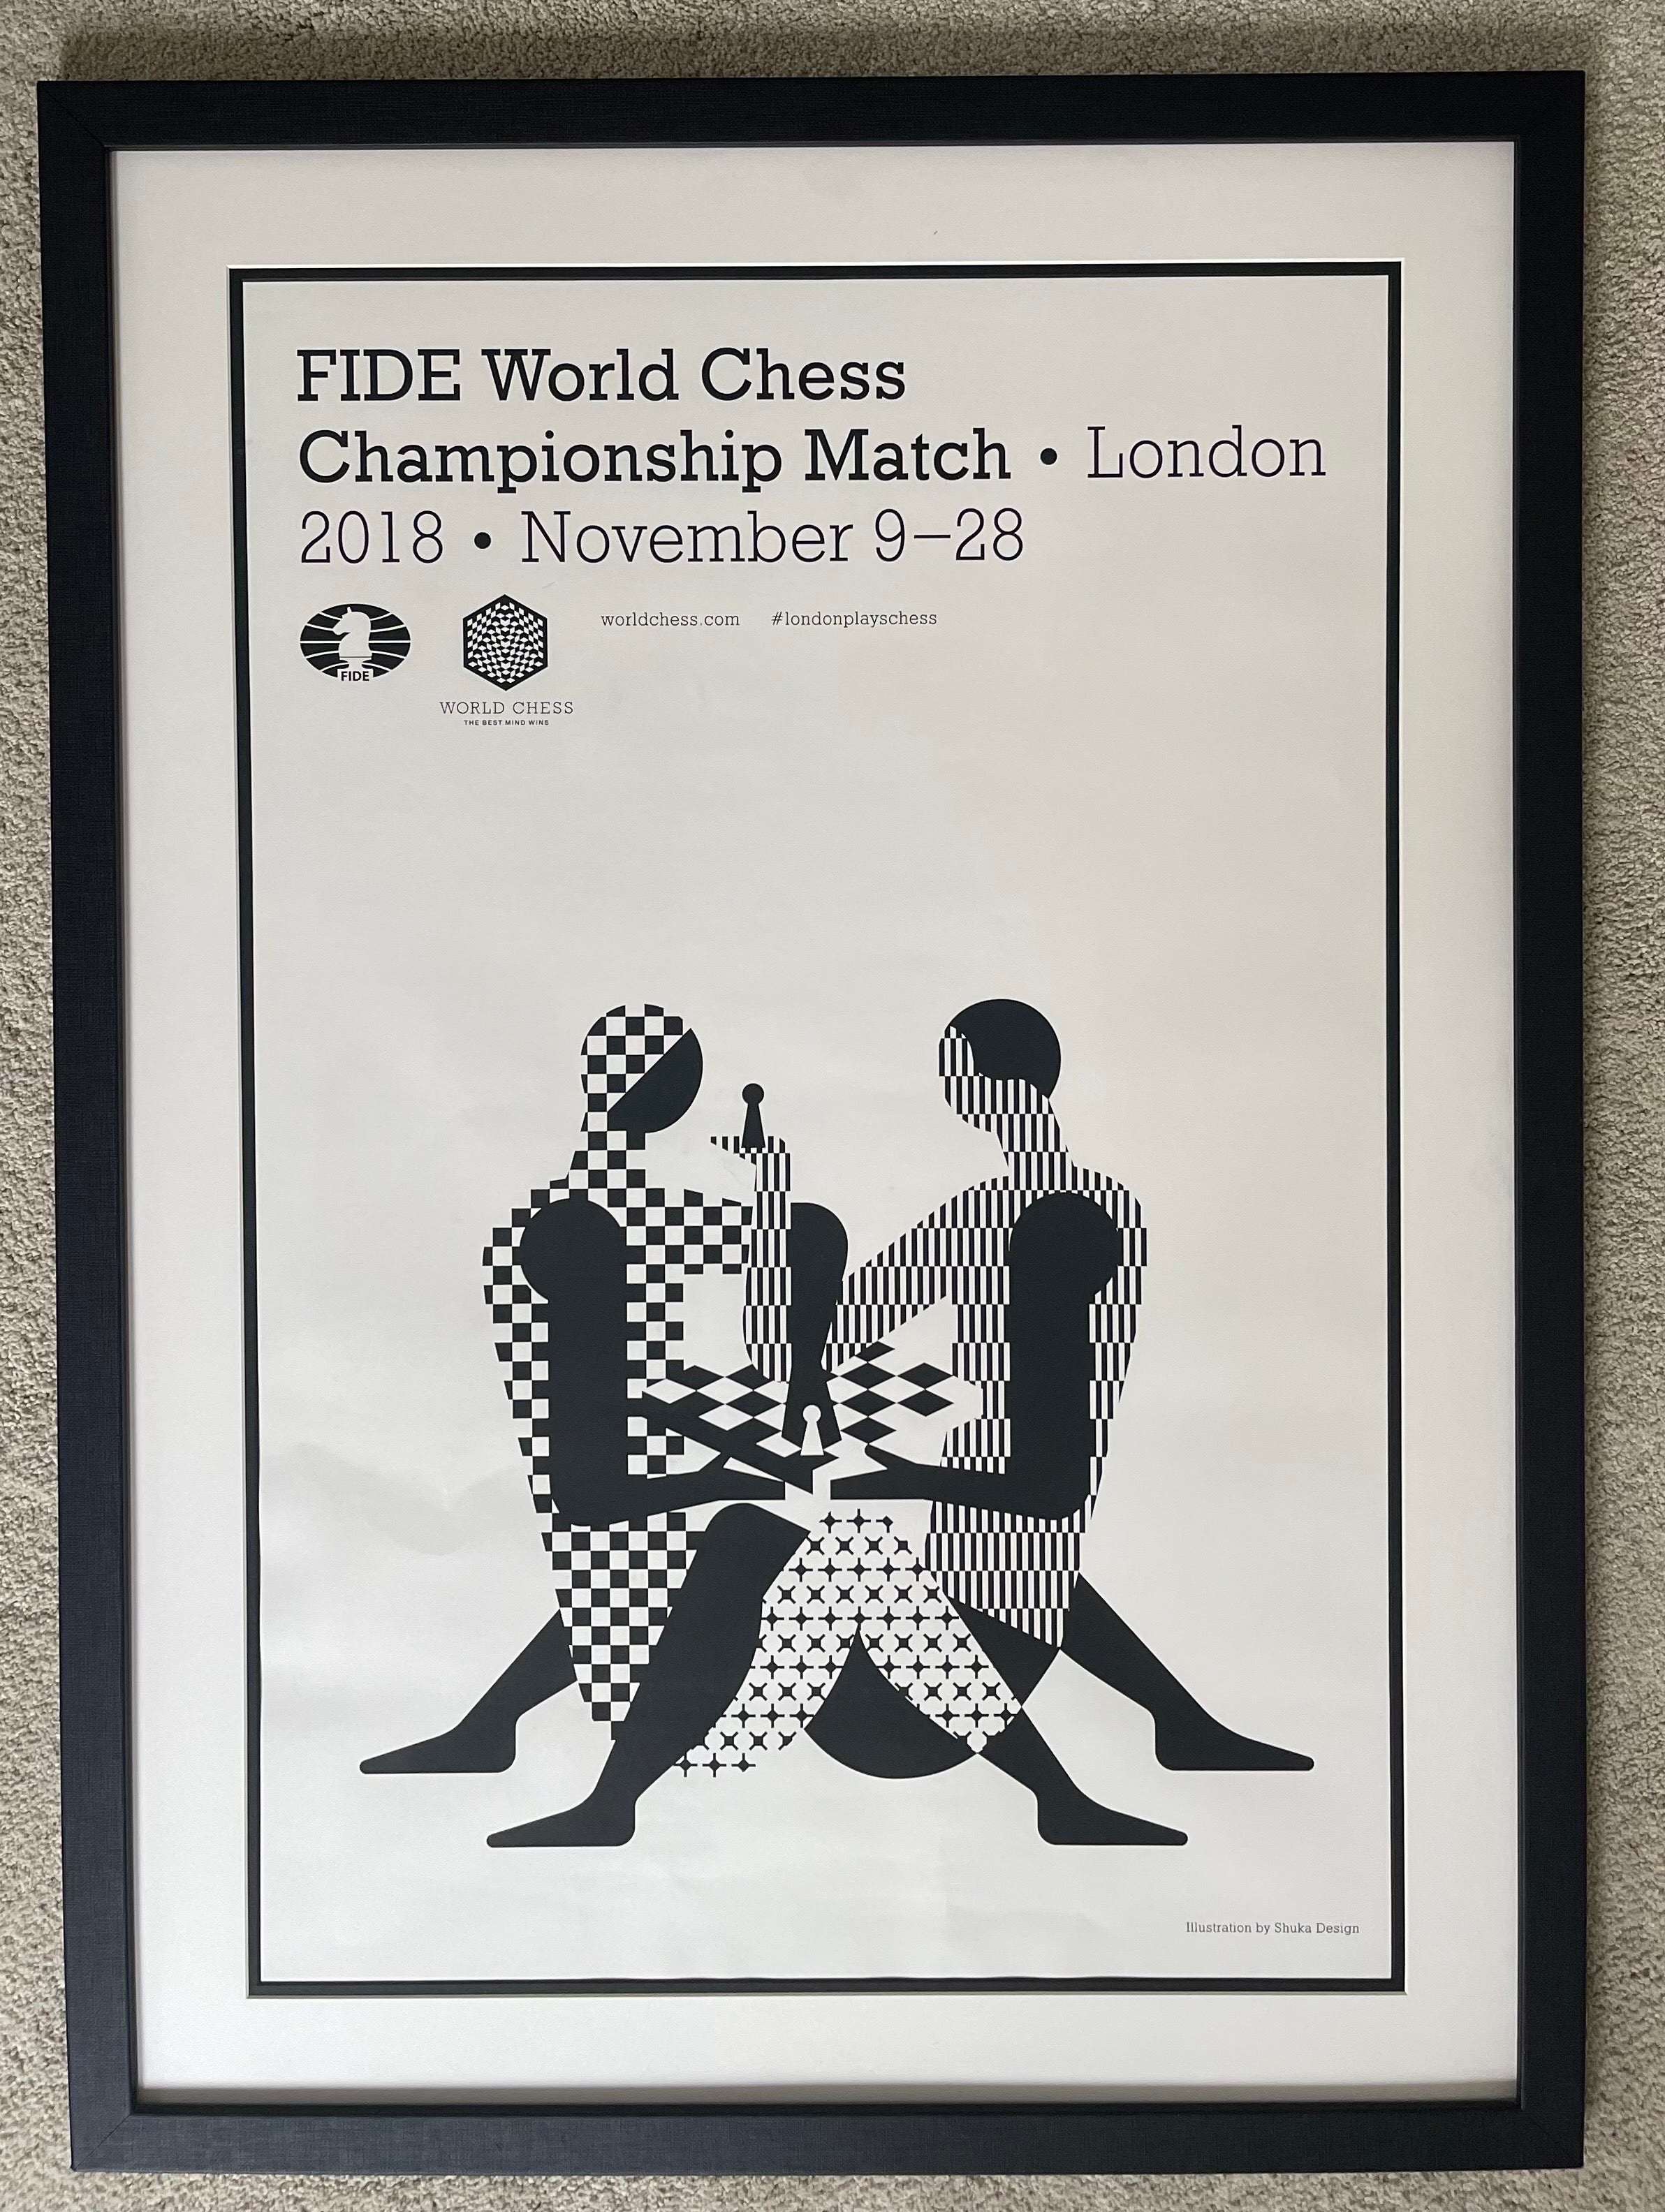 A really cool, controversial and hard to find FIDE World Chess Championship 